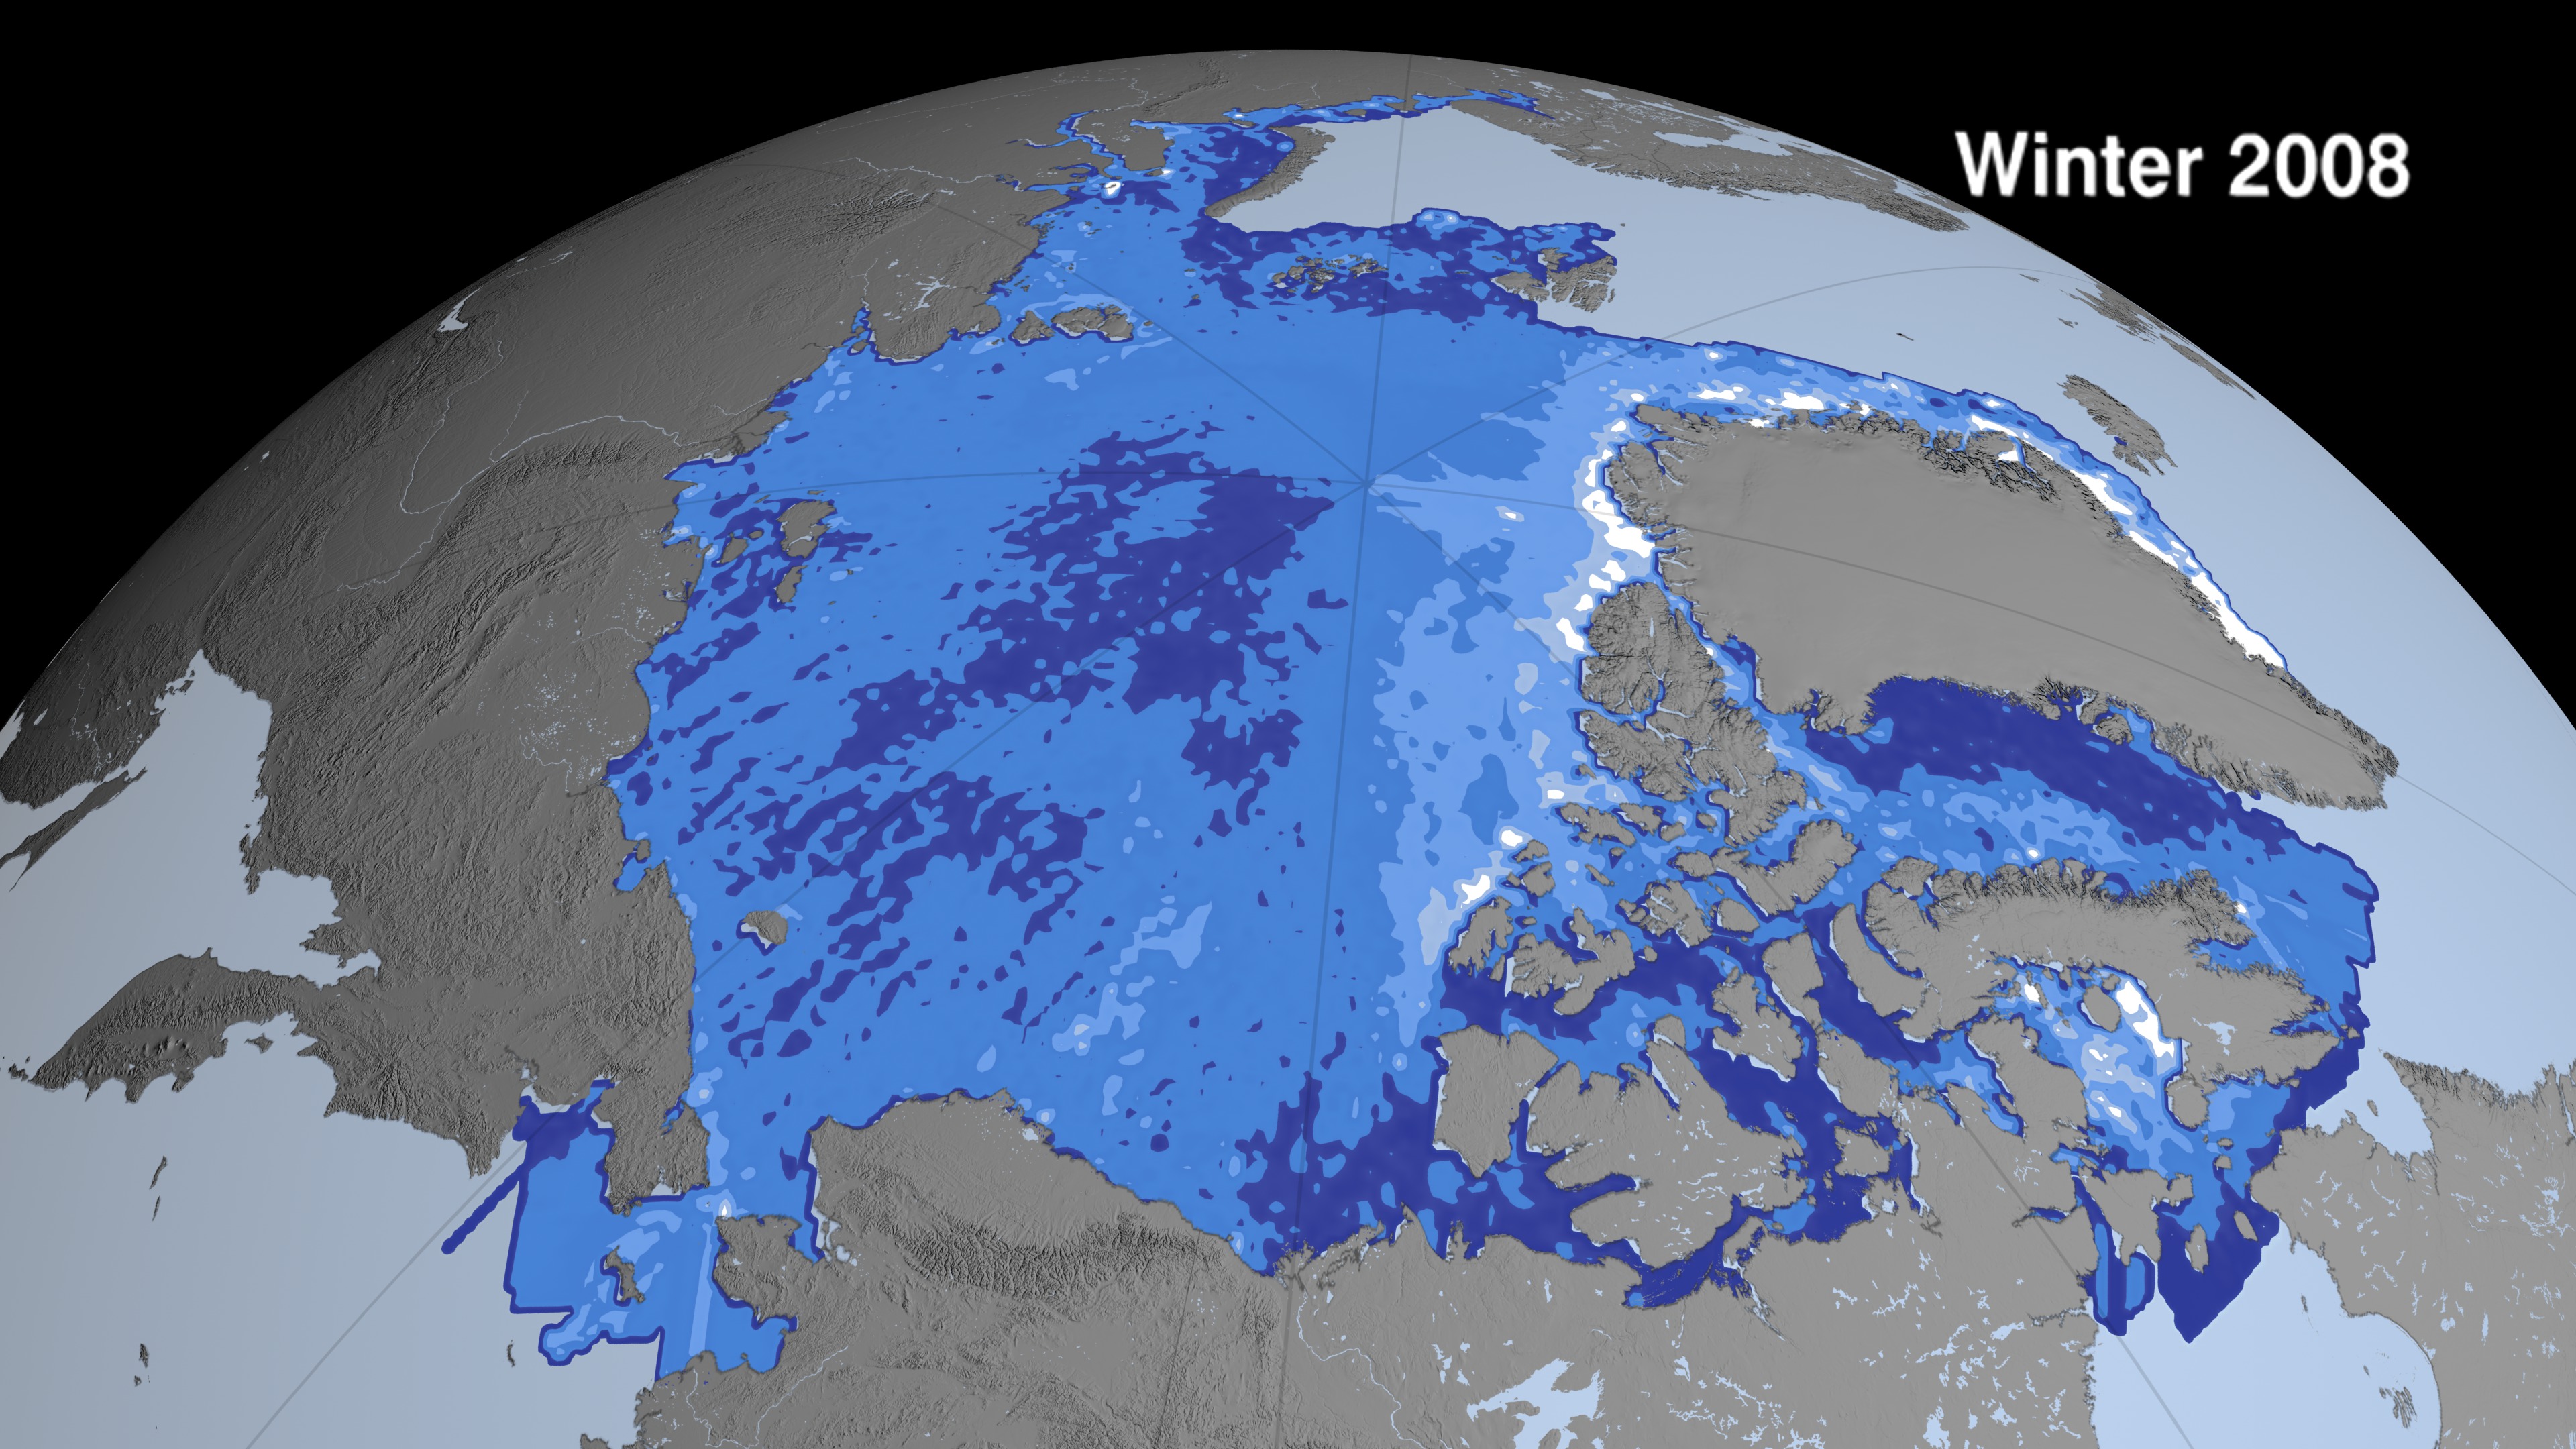 This sequence shows Arctic sea ice thickness derived from winter and fall campaigns from the ICESat satellite. Sea ice grows extent grows in the summer and shrinks in the winter. While the sea ice extent might look similar from year to year this thickness data shows dramatic thinning especially near the North Pole (shown in dark blue). This image was generated with data acquired between Feb 17 - Mar 21, 2008.